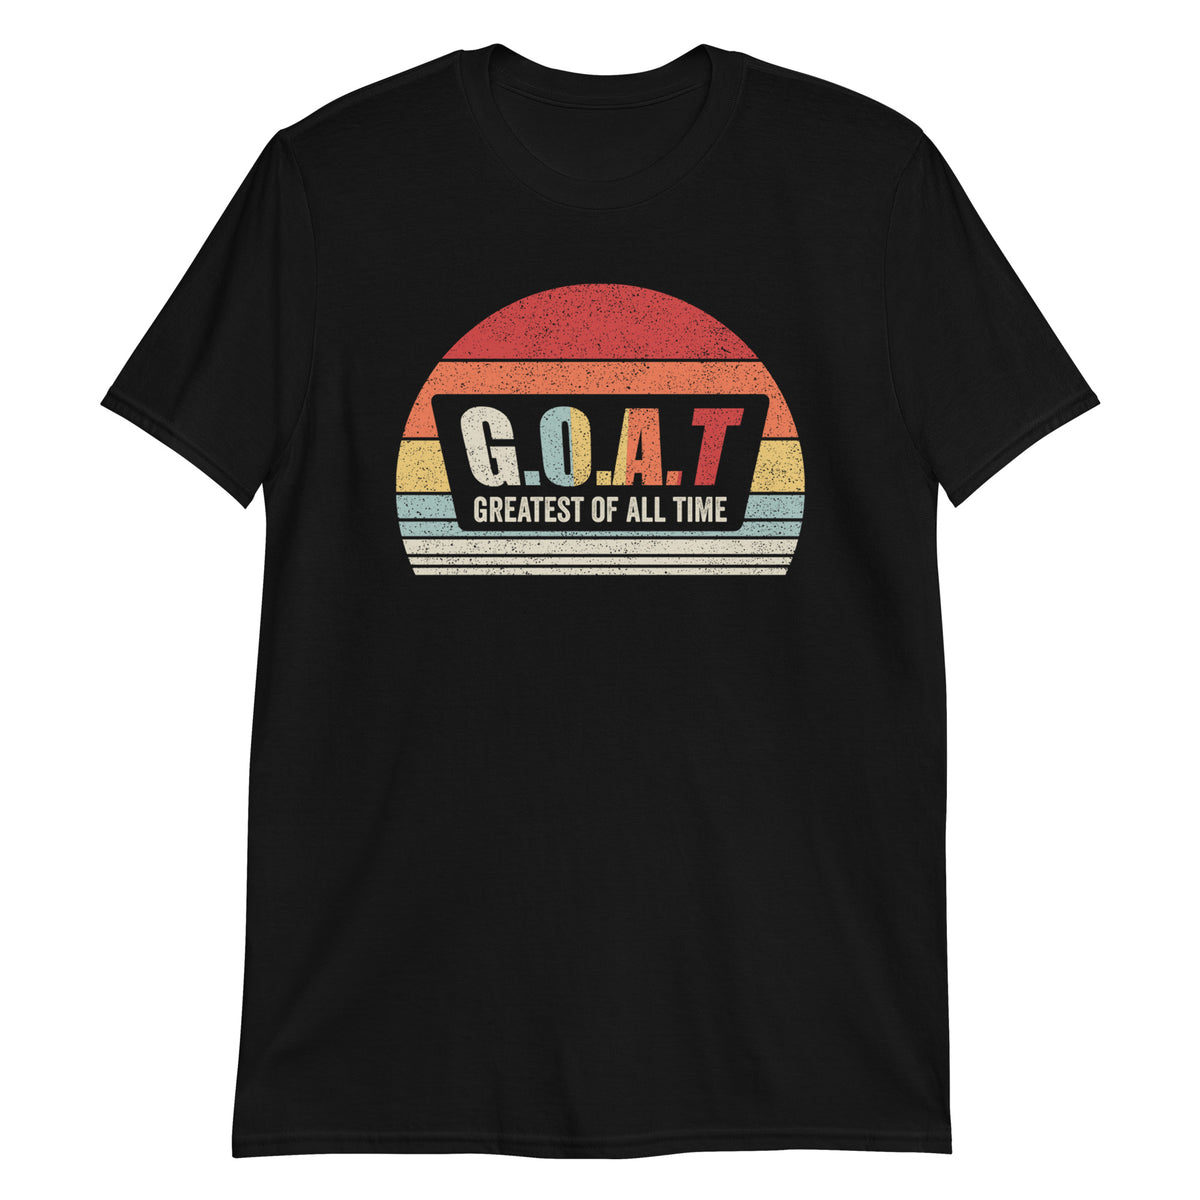 Vintage Retro Vintage Retro G.O.A.T Greatest Of All Time Goat